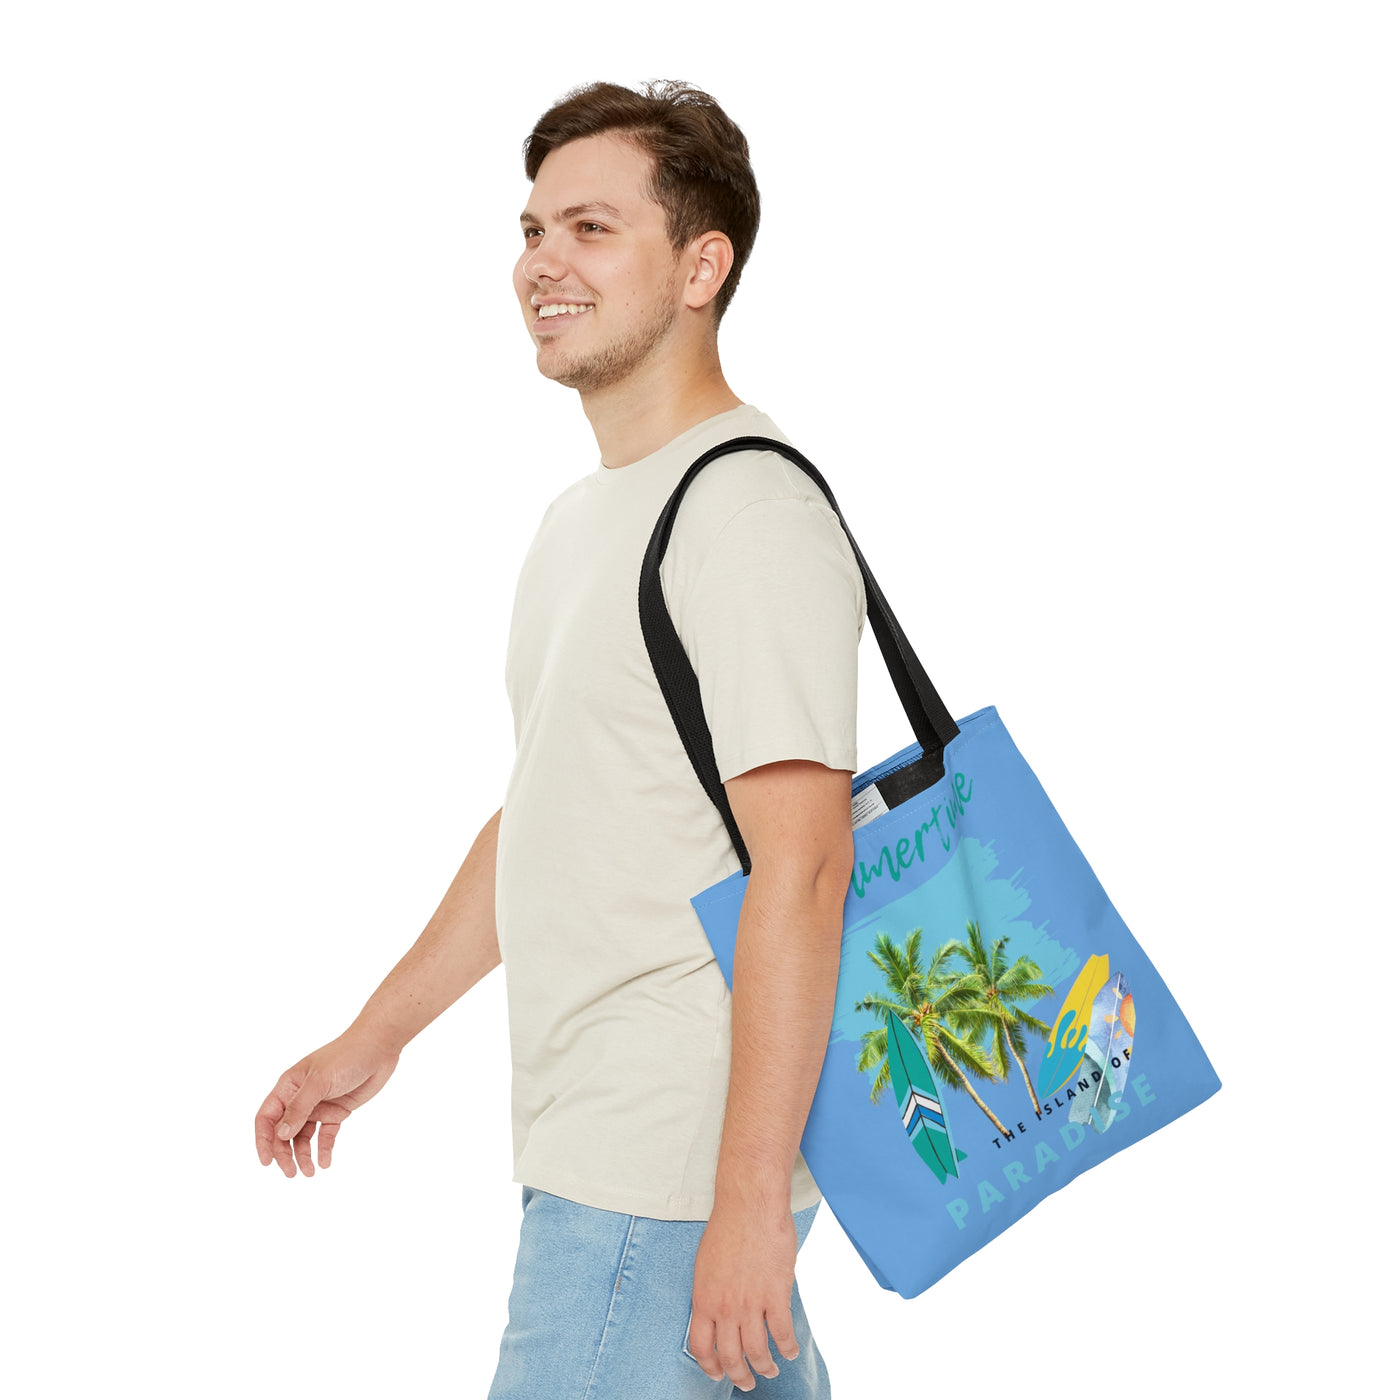 Summer Time The island of Paradise Tote Bag (AOP)